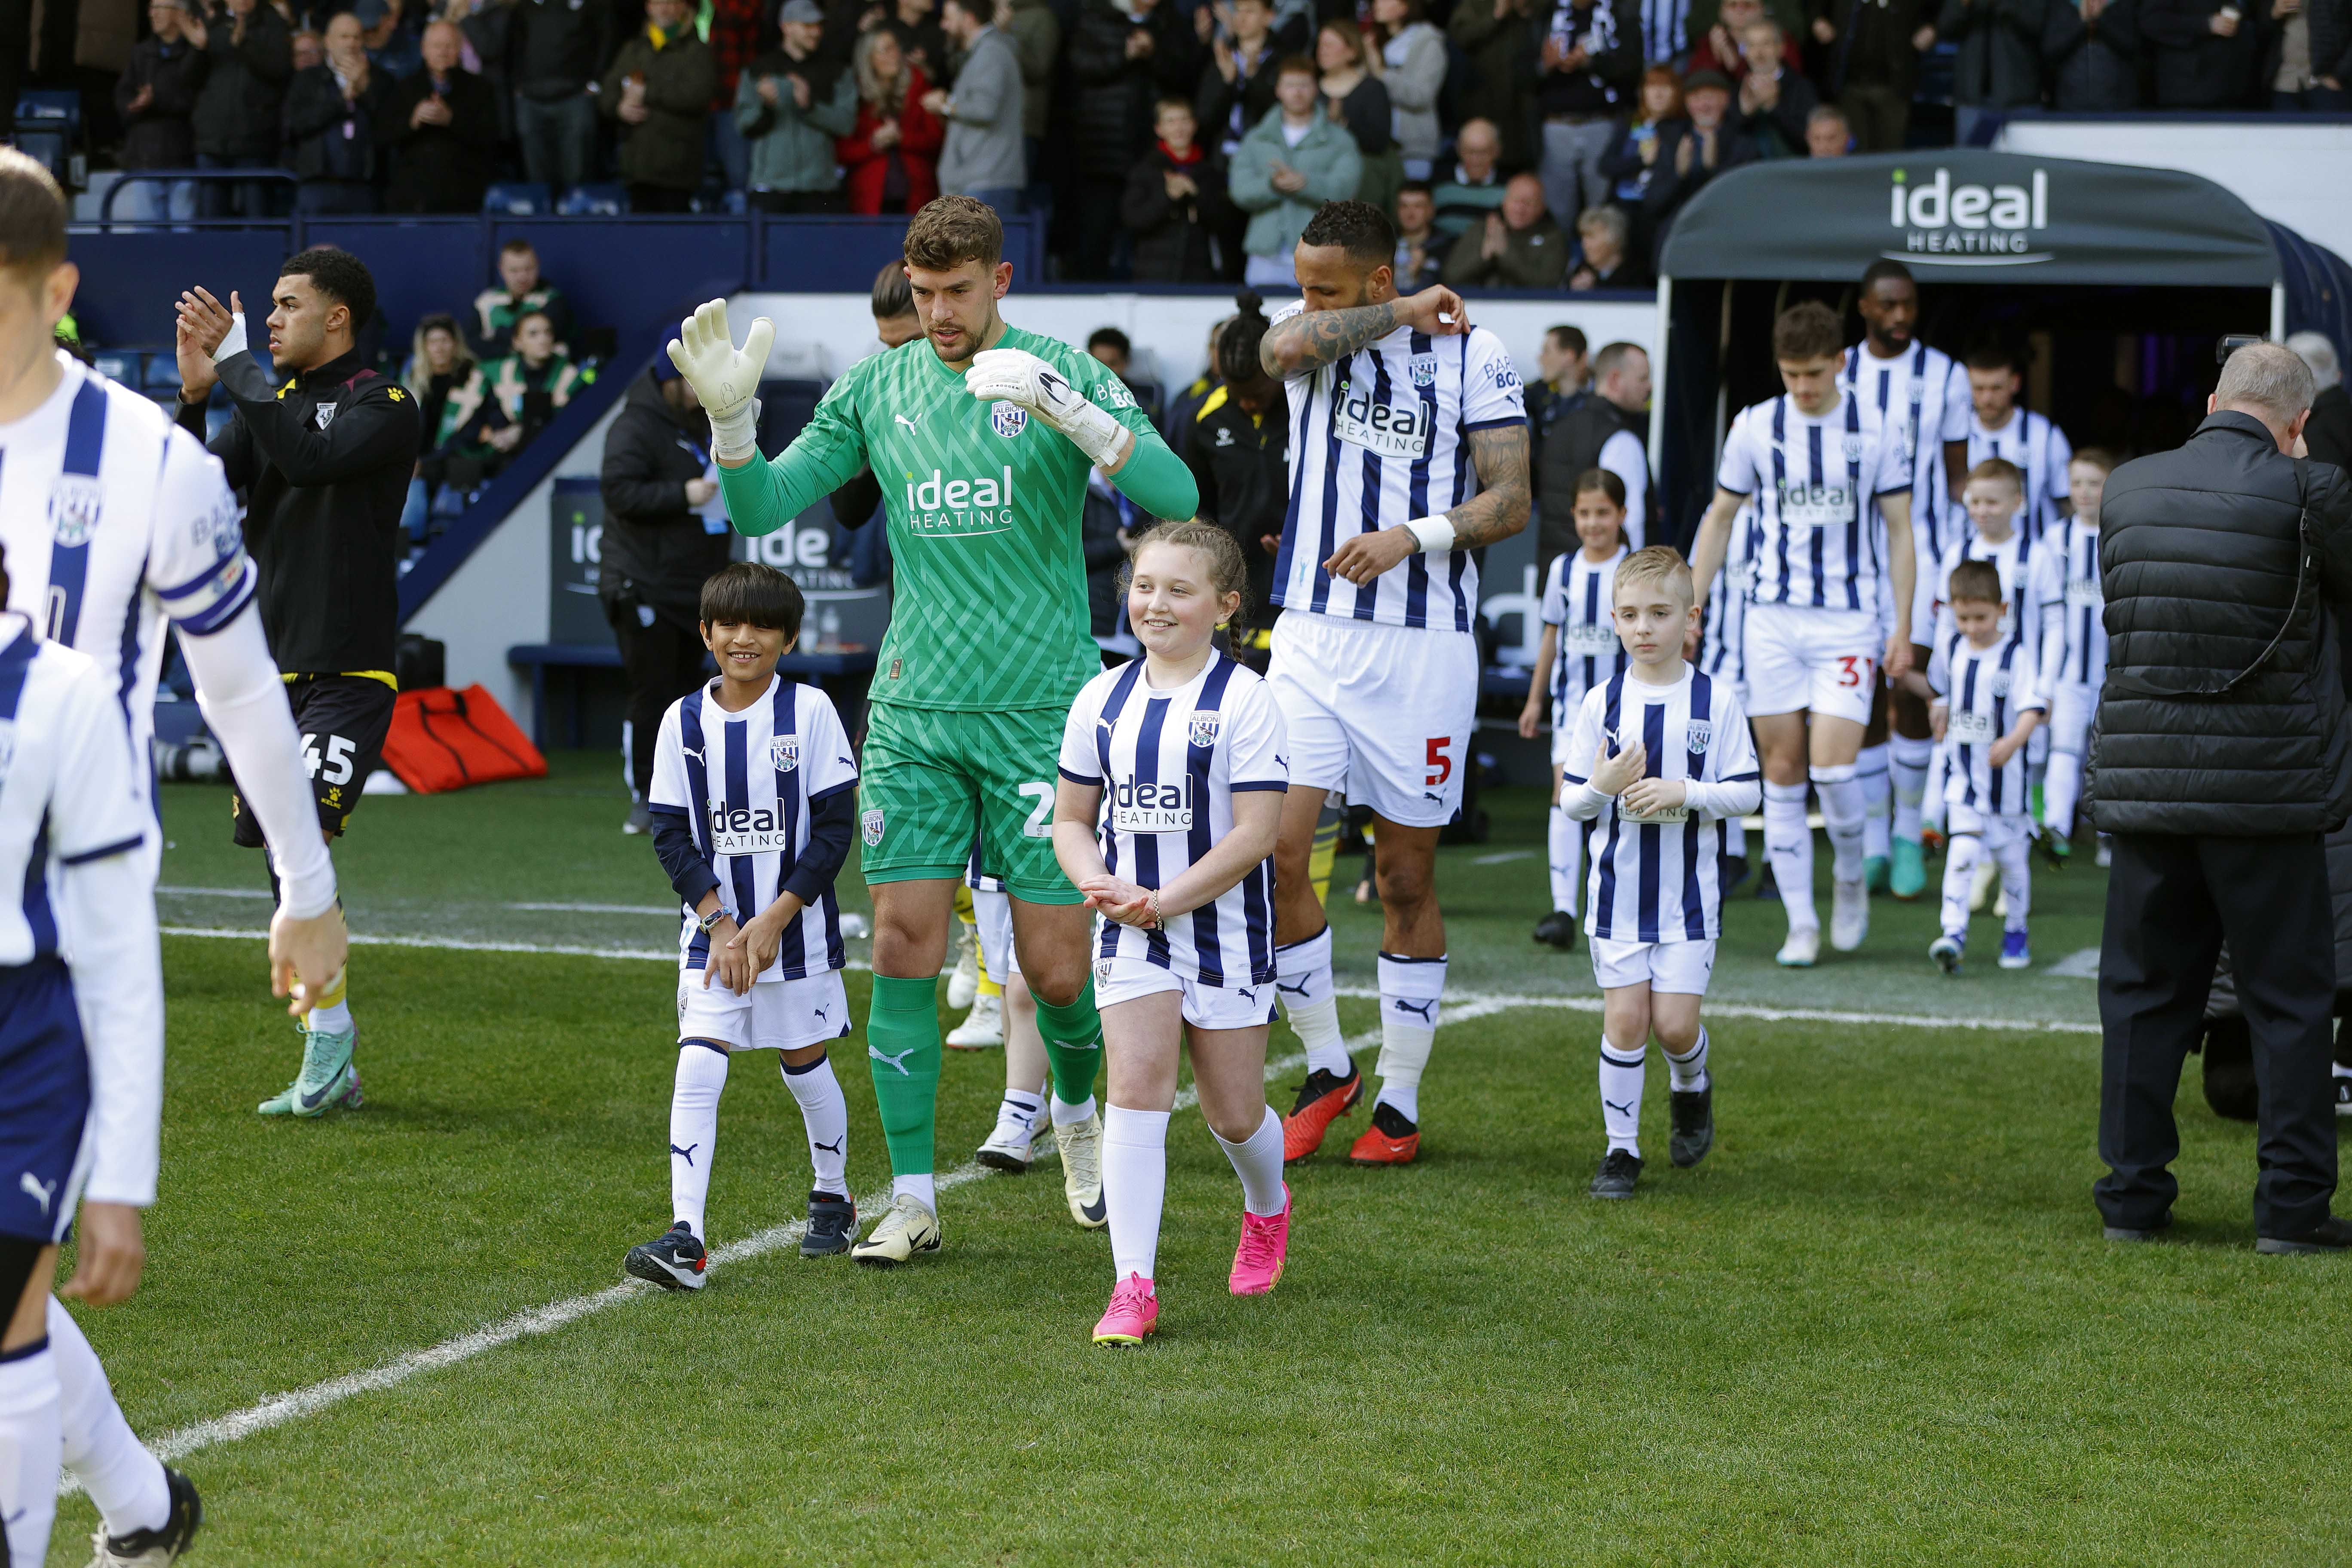 Alex Palmer walking out of the tunnel at The Hawthorns against Watford with two mascots